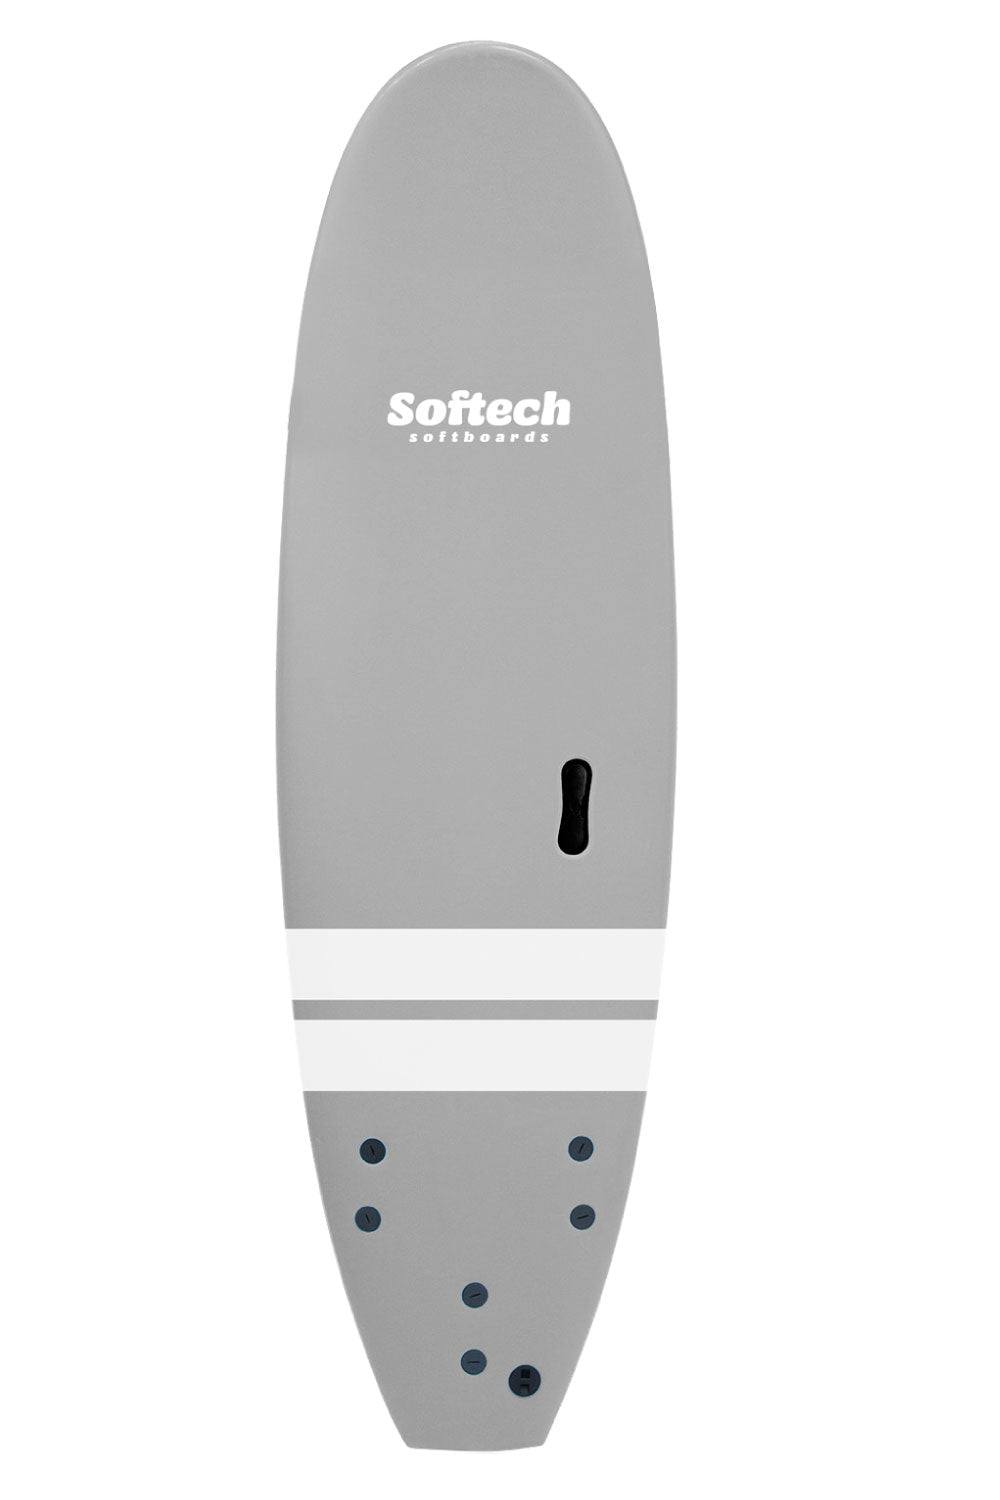 Softech Roller 8'4 Softboard - Comes with fins